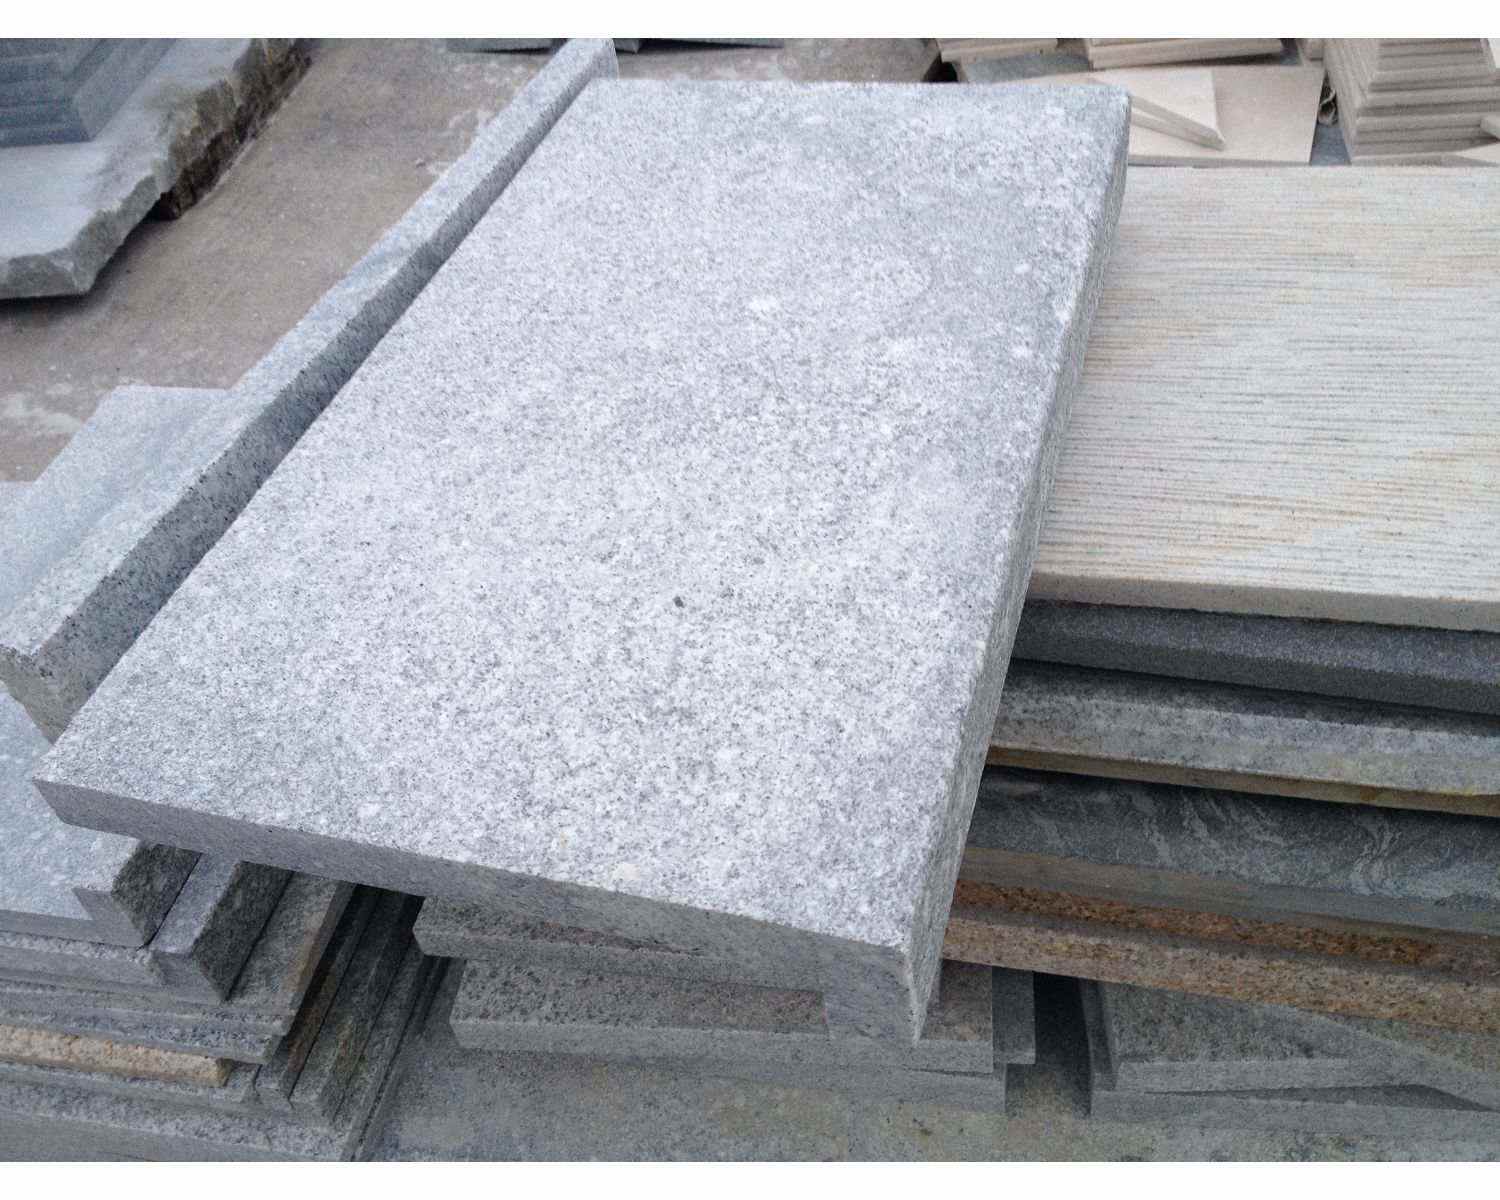 Flamed Viscount White Granite Coping Stone with Rebate Edge